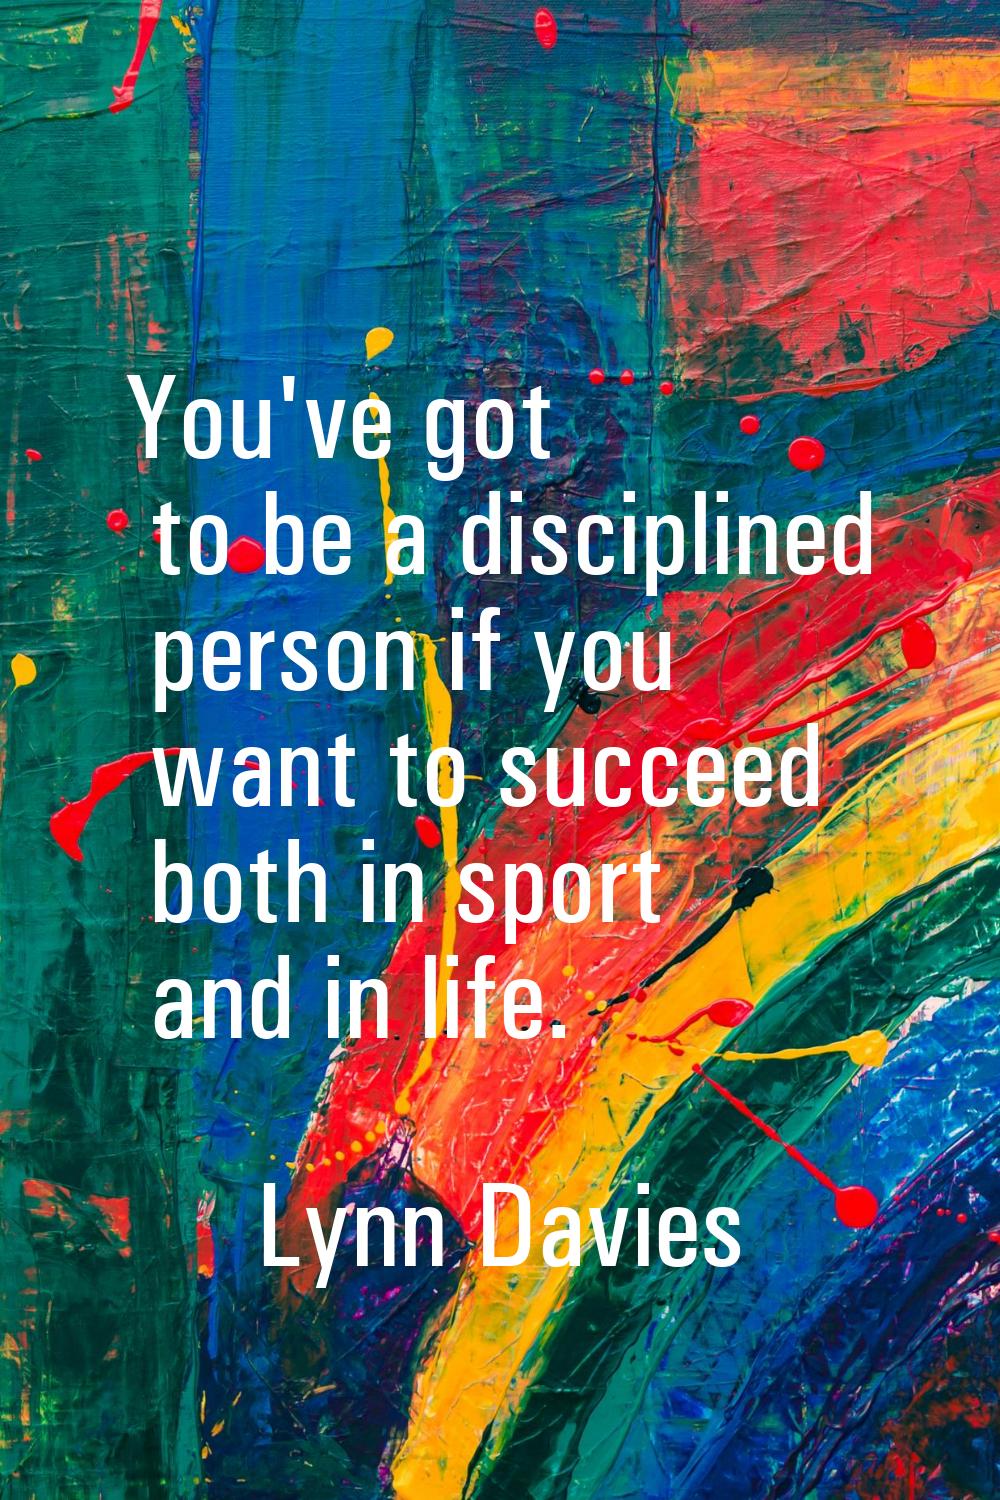 You've got to be a disciplined person if you want to succeed both in sport and in life.